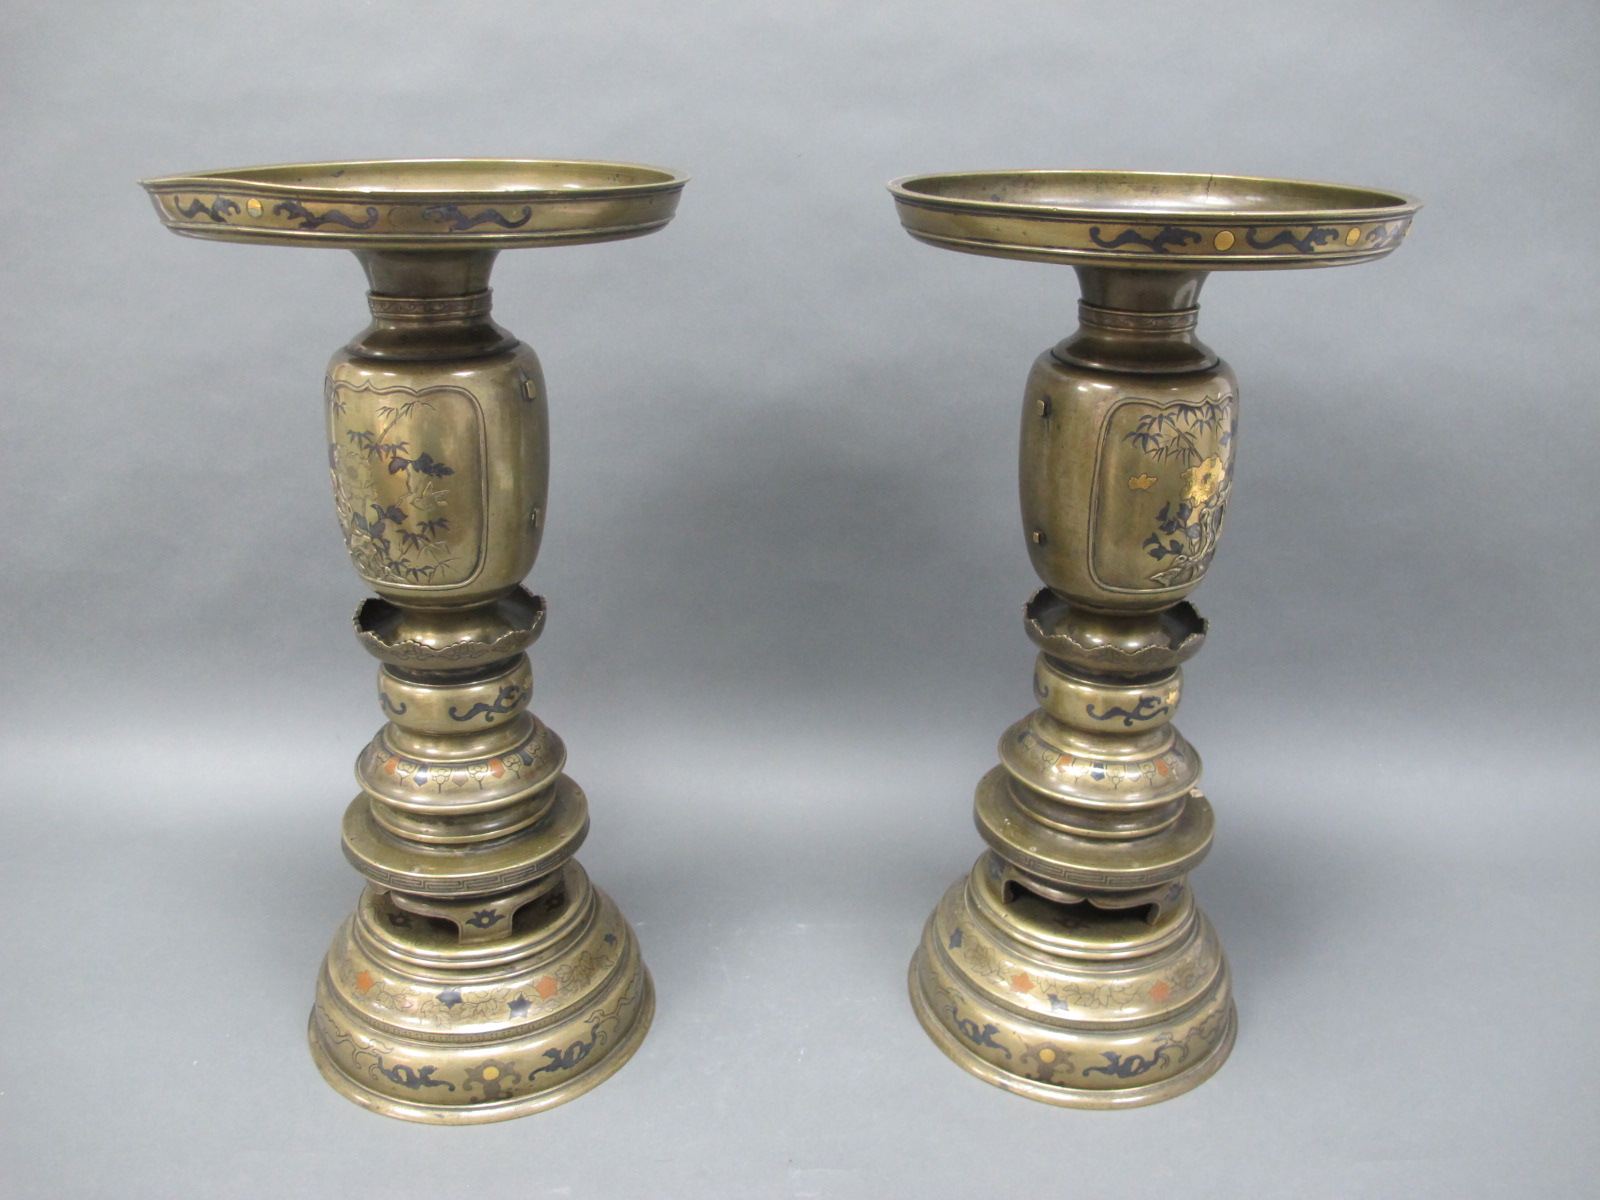 A Pair of Japanese Late XIX Century Three Sectional Brass Vases, with overlaid decoration of